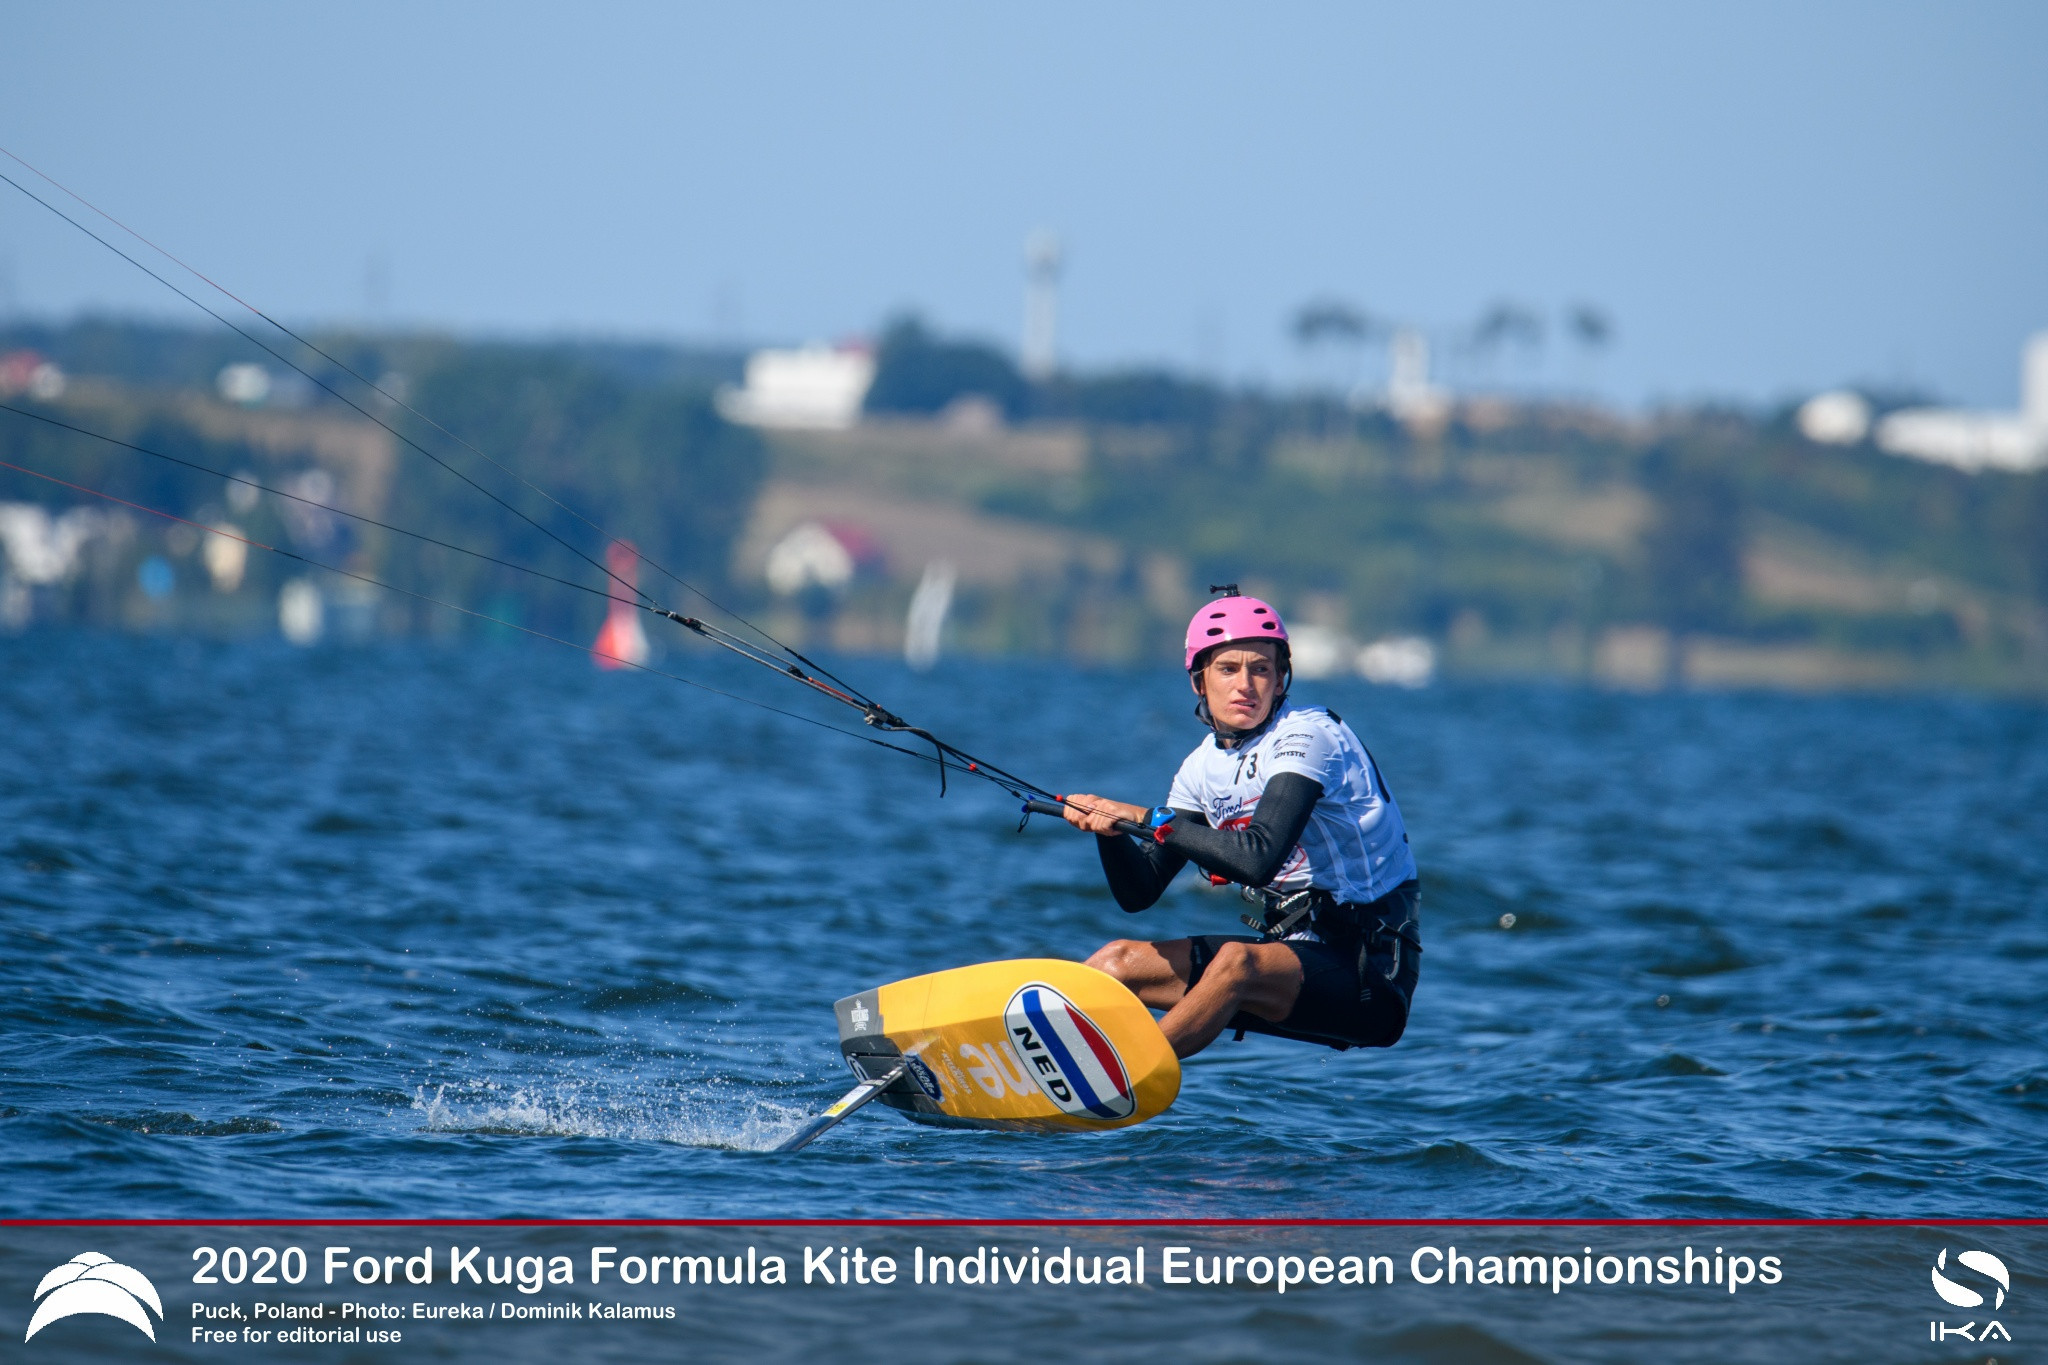 Damasiewicz and De Ramecourt lead after day one of 2020 Formula Kite Individual European Championships